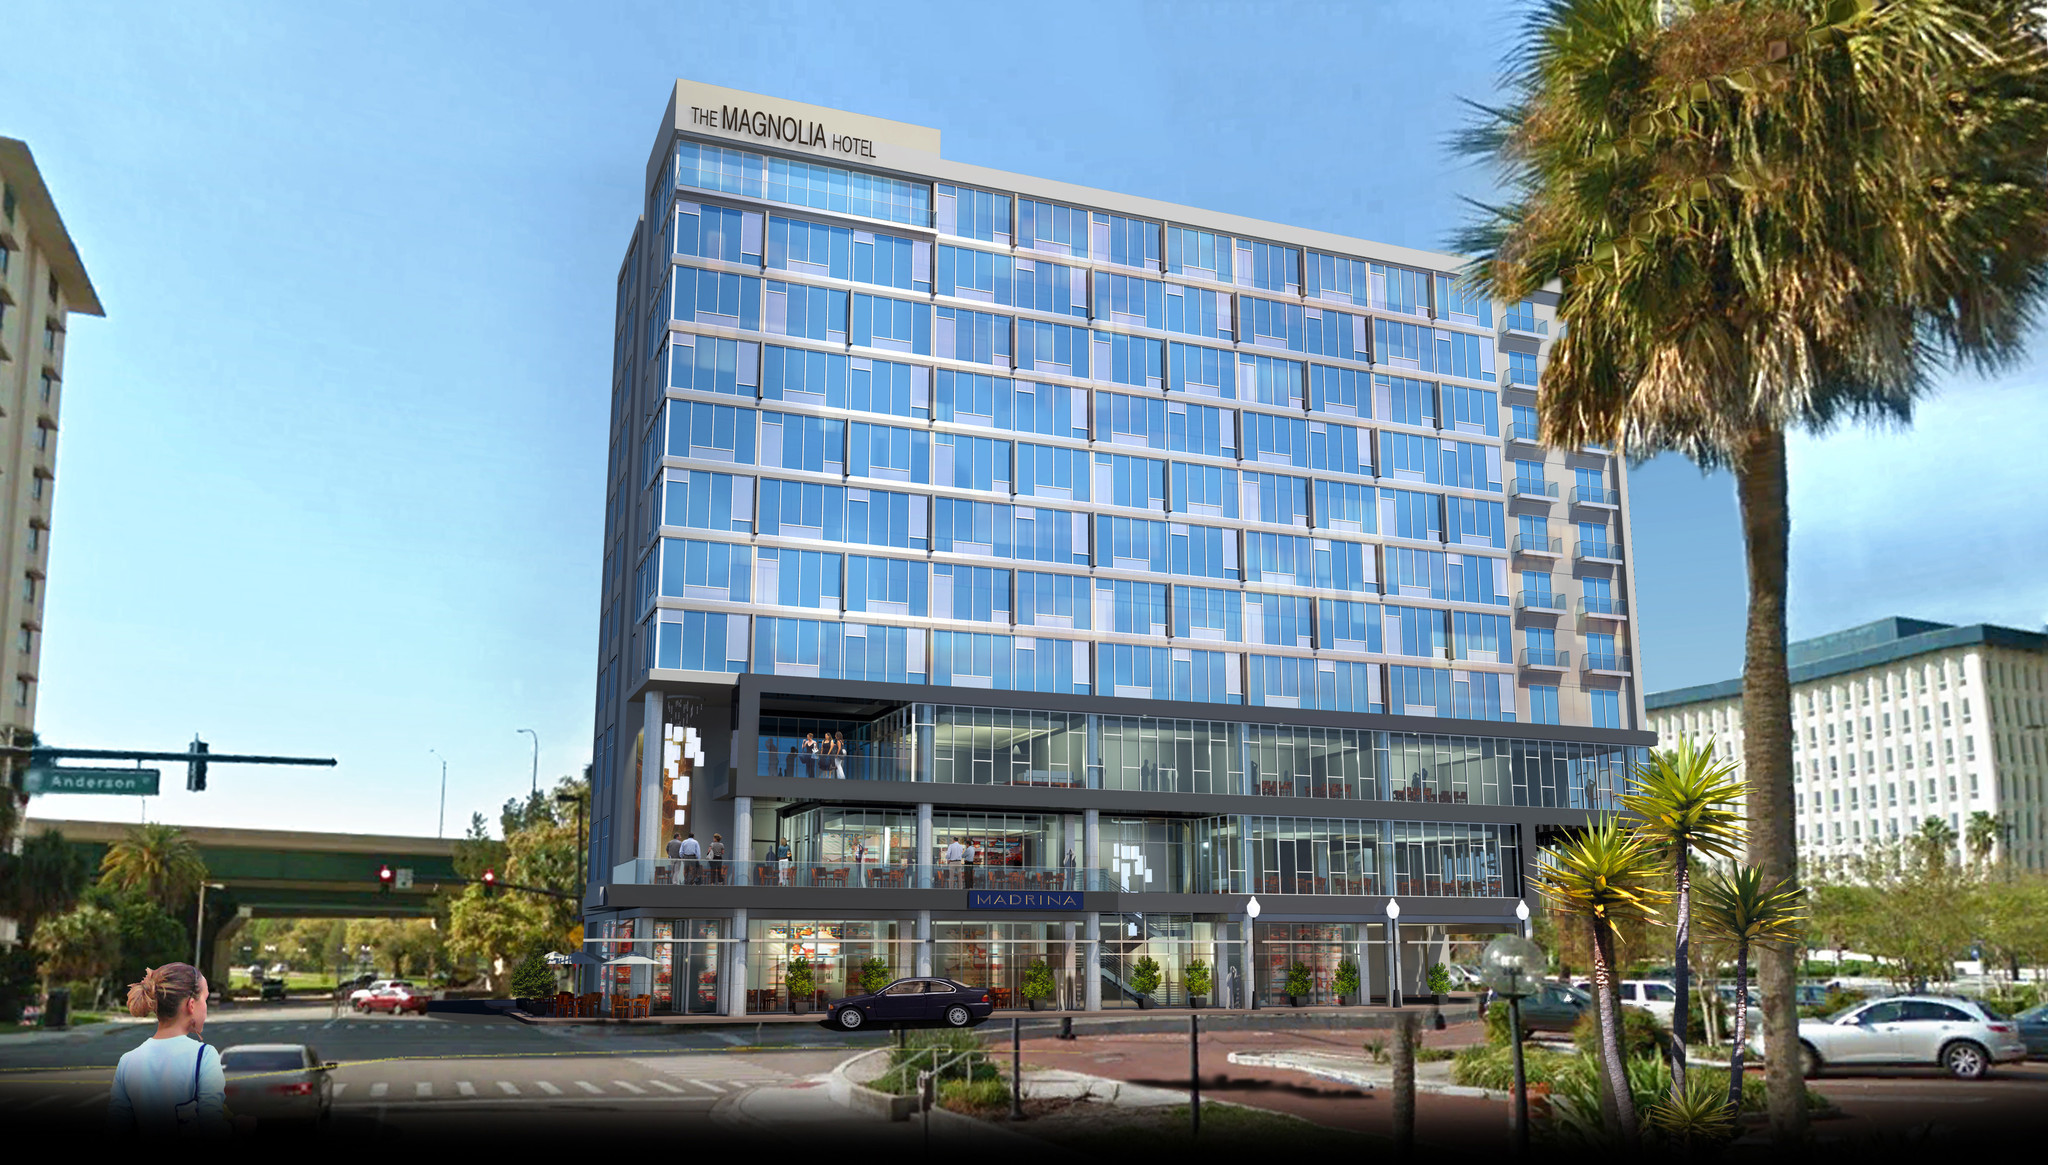 Downtown Orlando room demand data support GDC's plan for new hotel